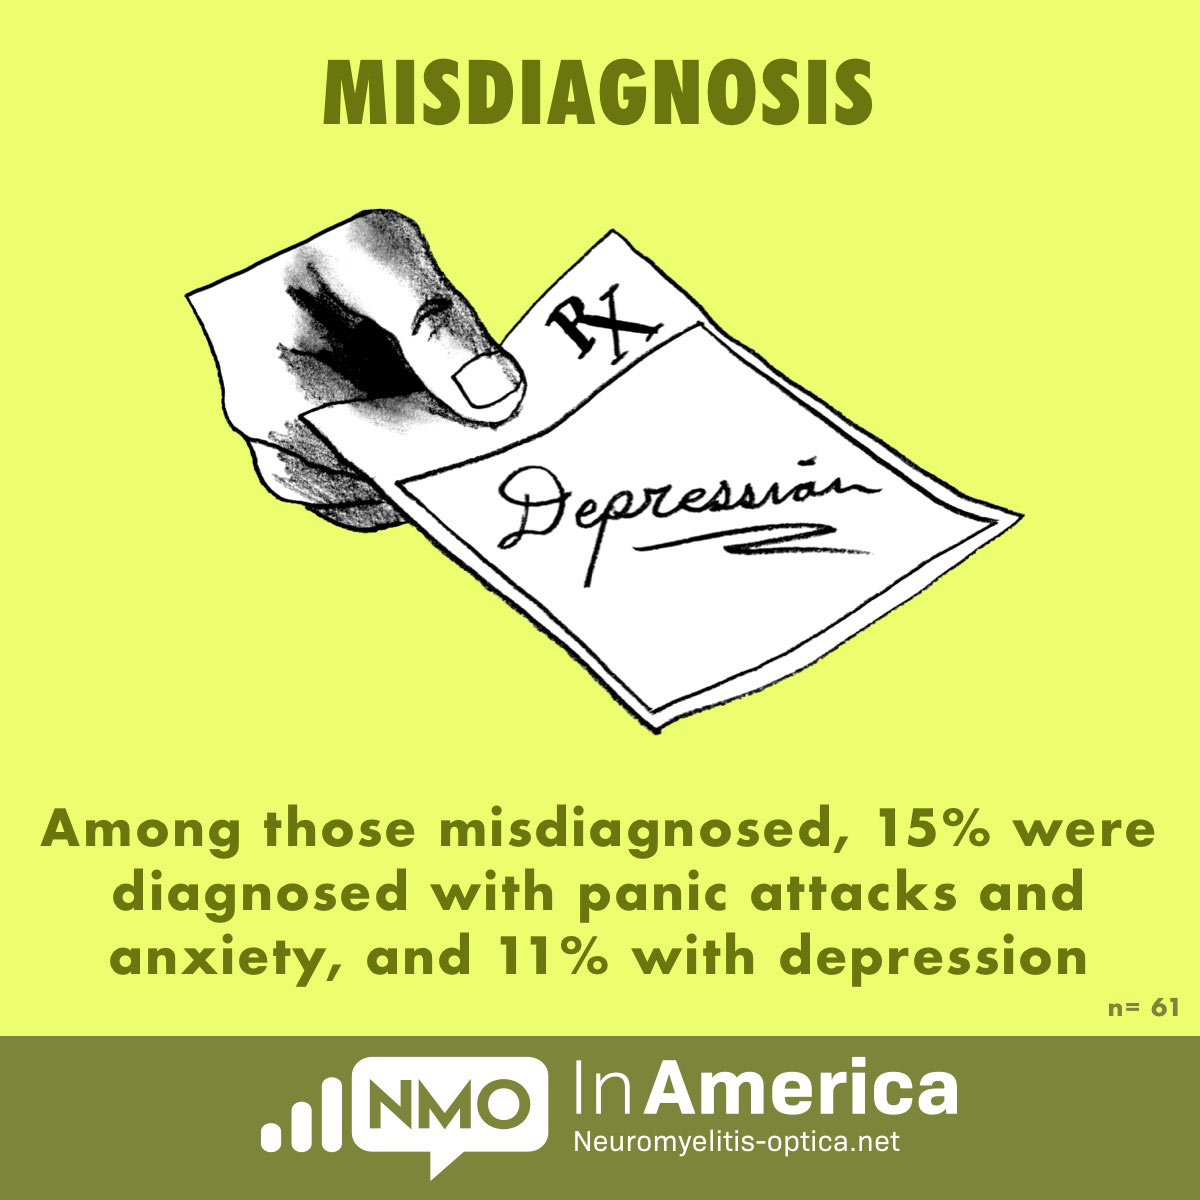 15% were diagnosed with panic attacks